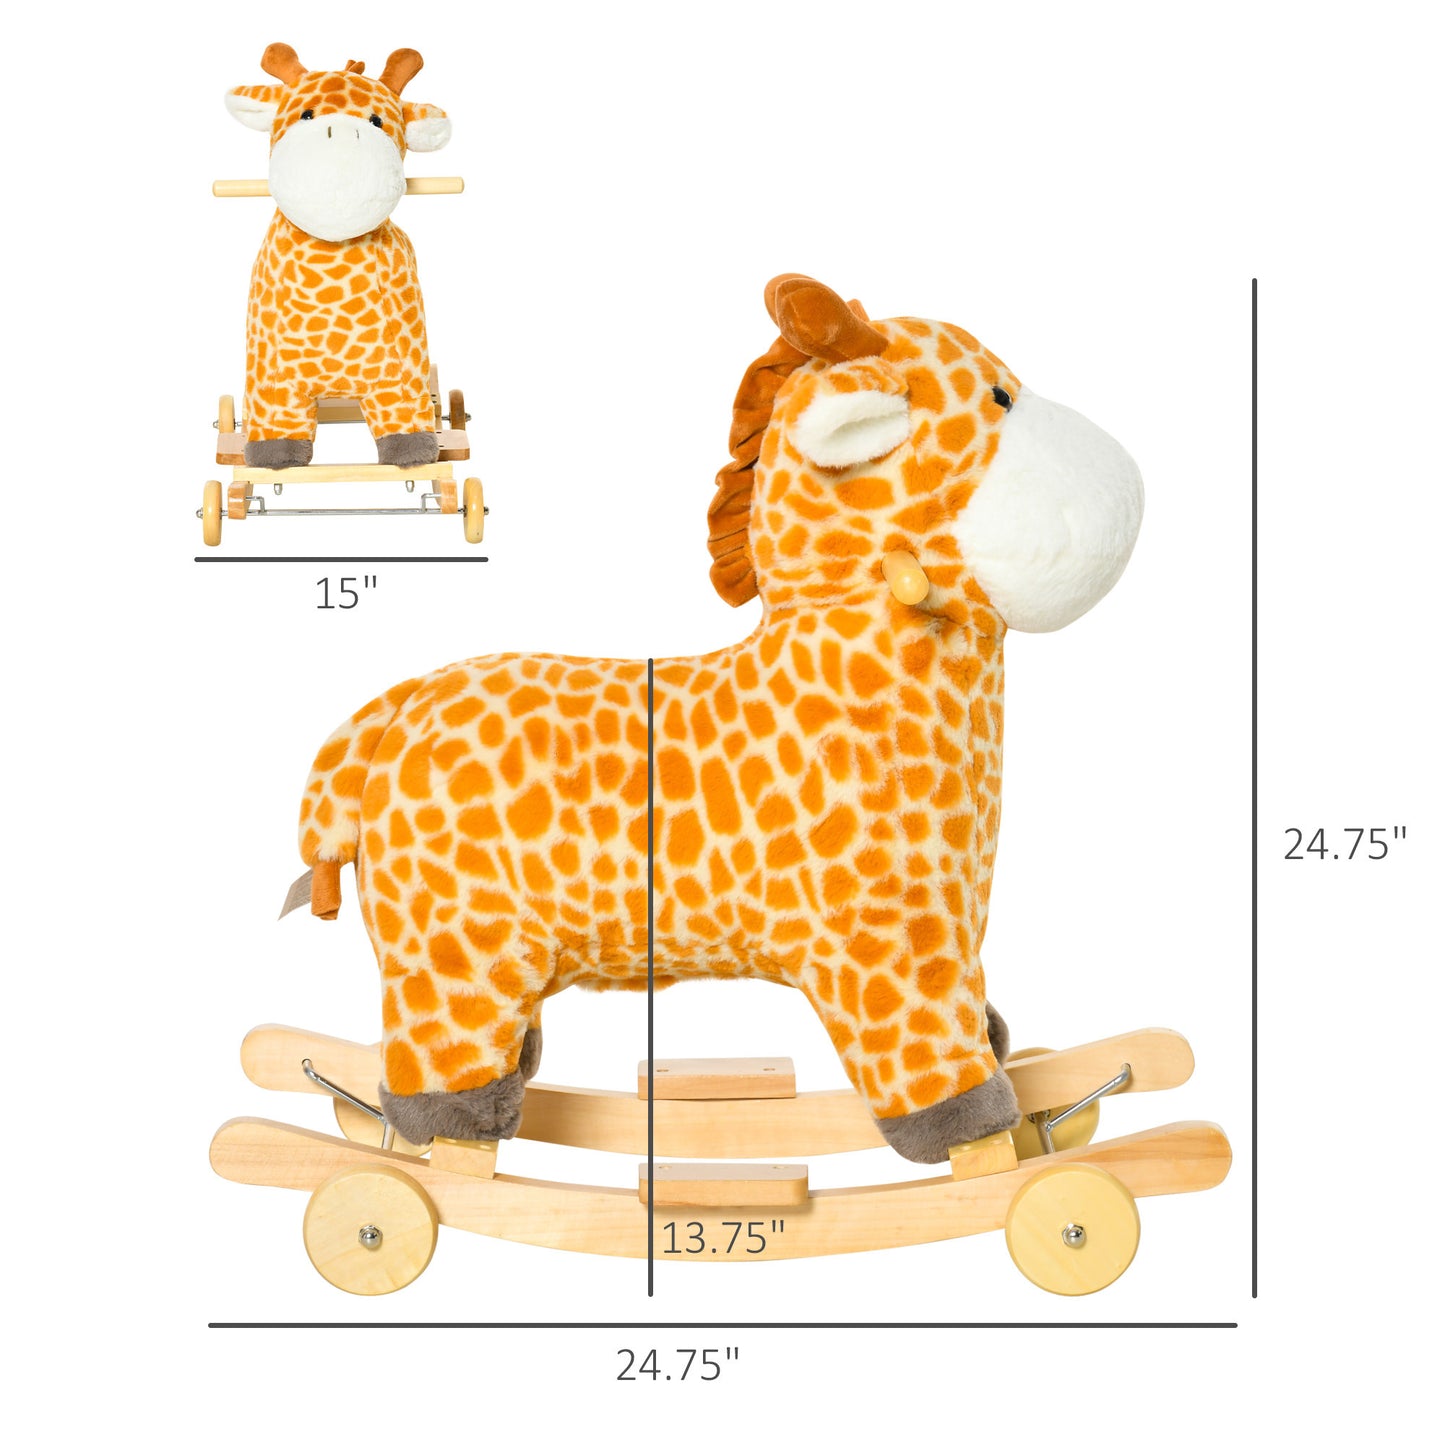 2-in-1 Kids Plush Ride-On Rocking Horse Toy, Giraffe-shaped Plush Rocker with Realistic Sounds for Children 3 to 6 Years, Yellow